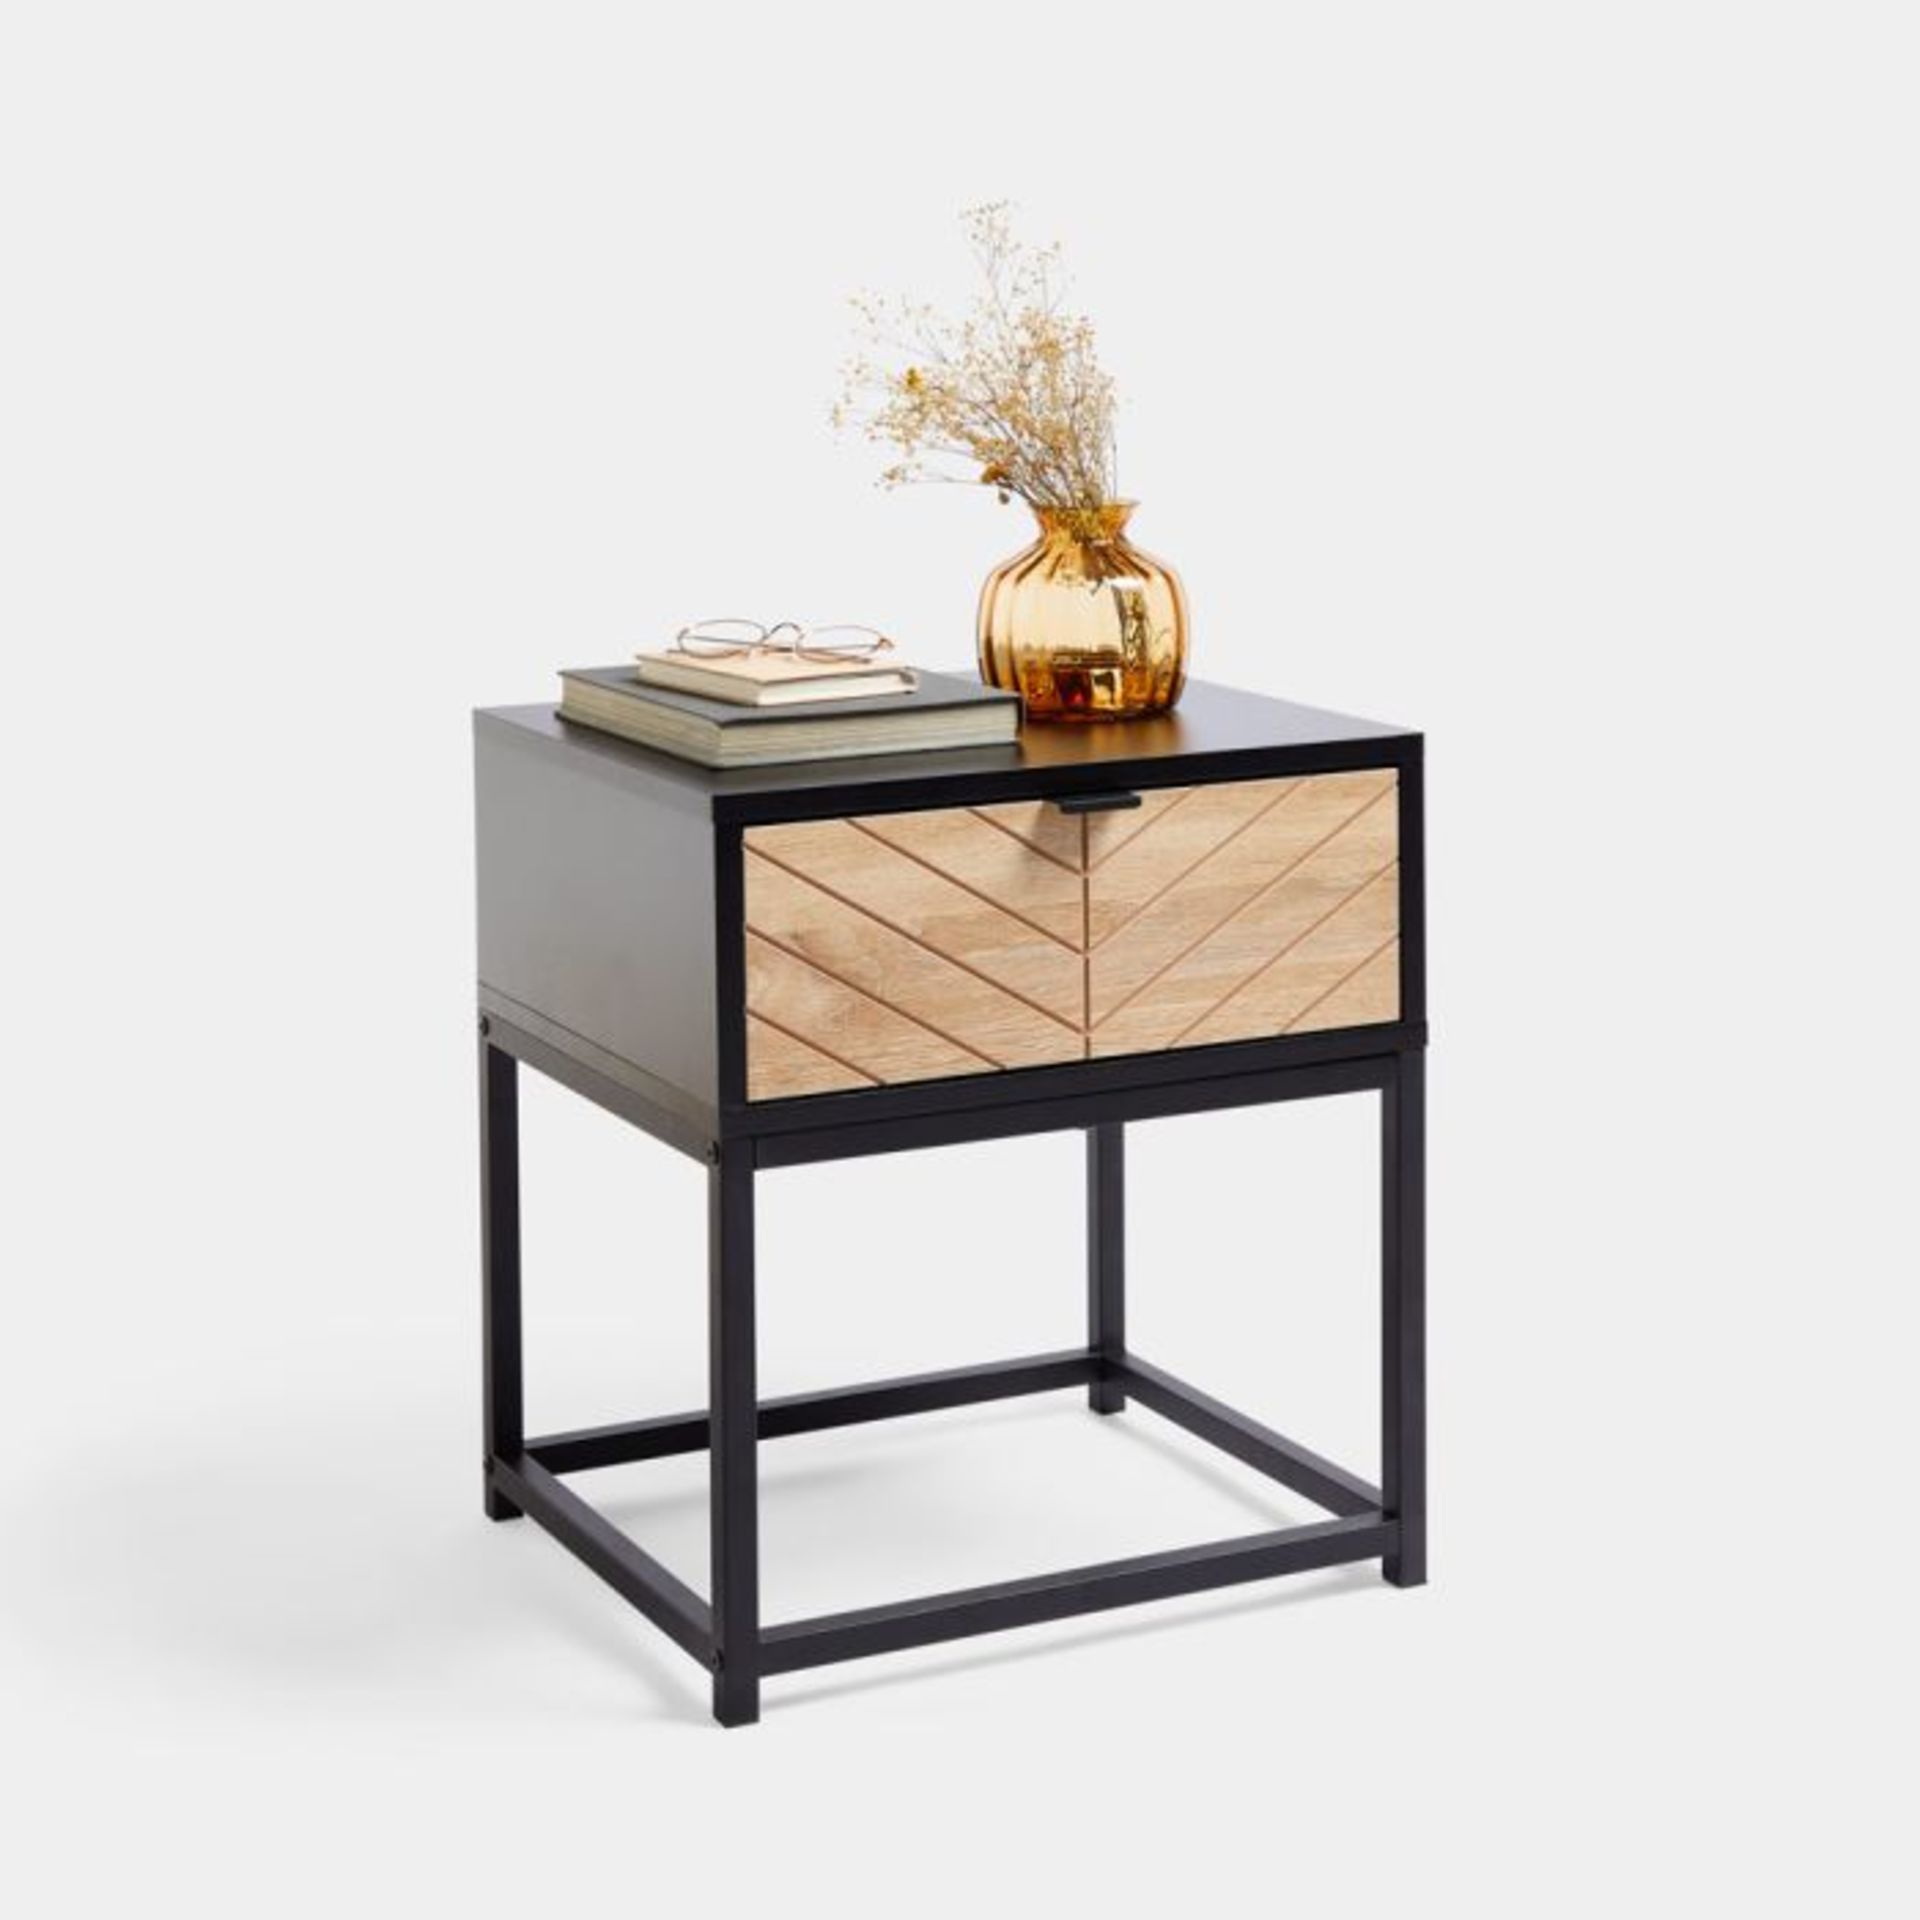 Dalton 1 Drawer Side Table. - ER36. The table features chevron detailing on a wood-effect body,